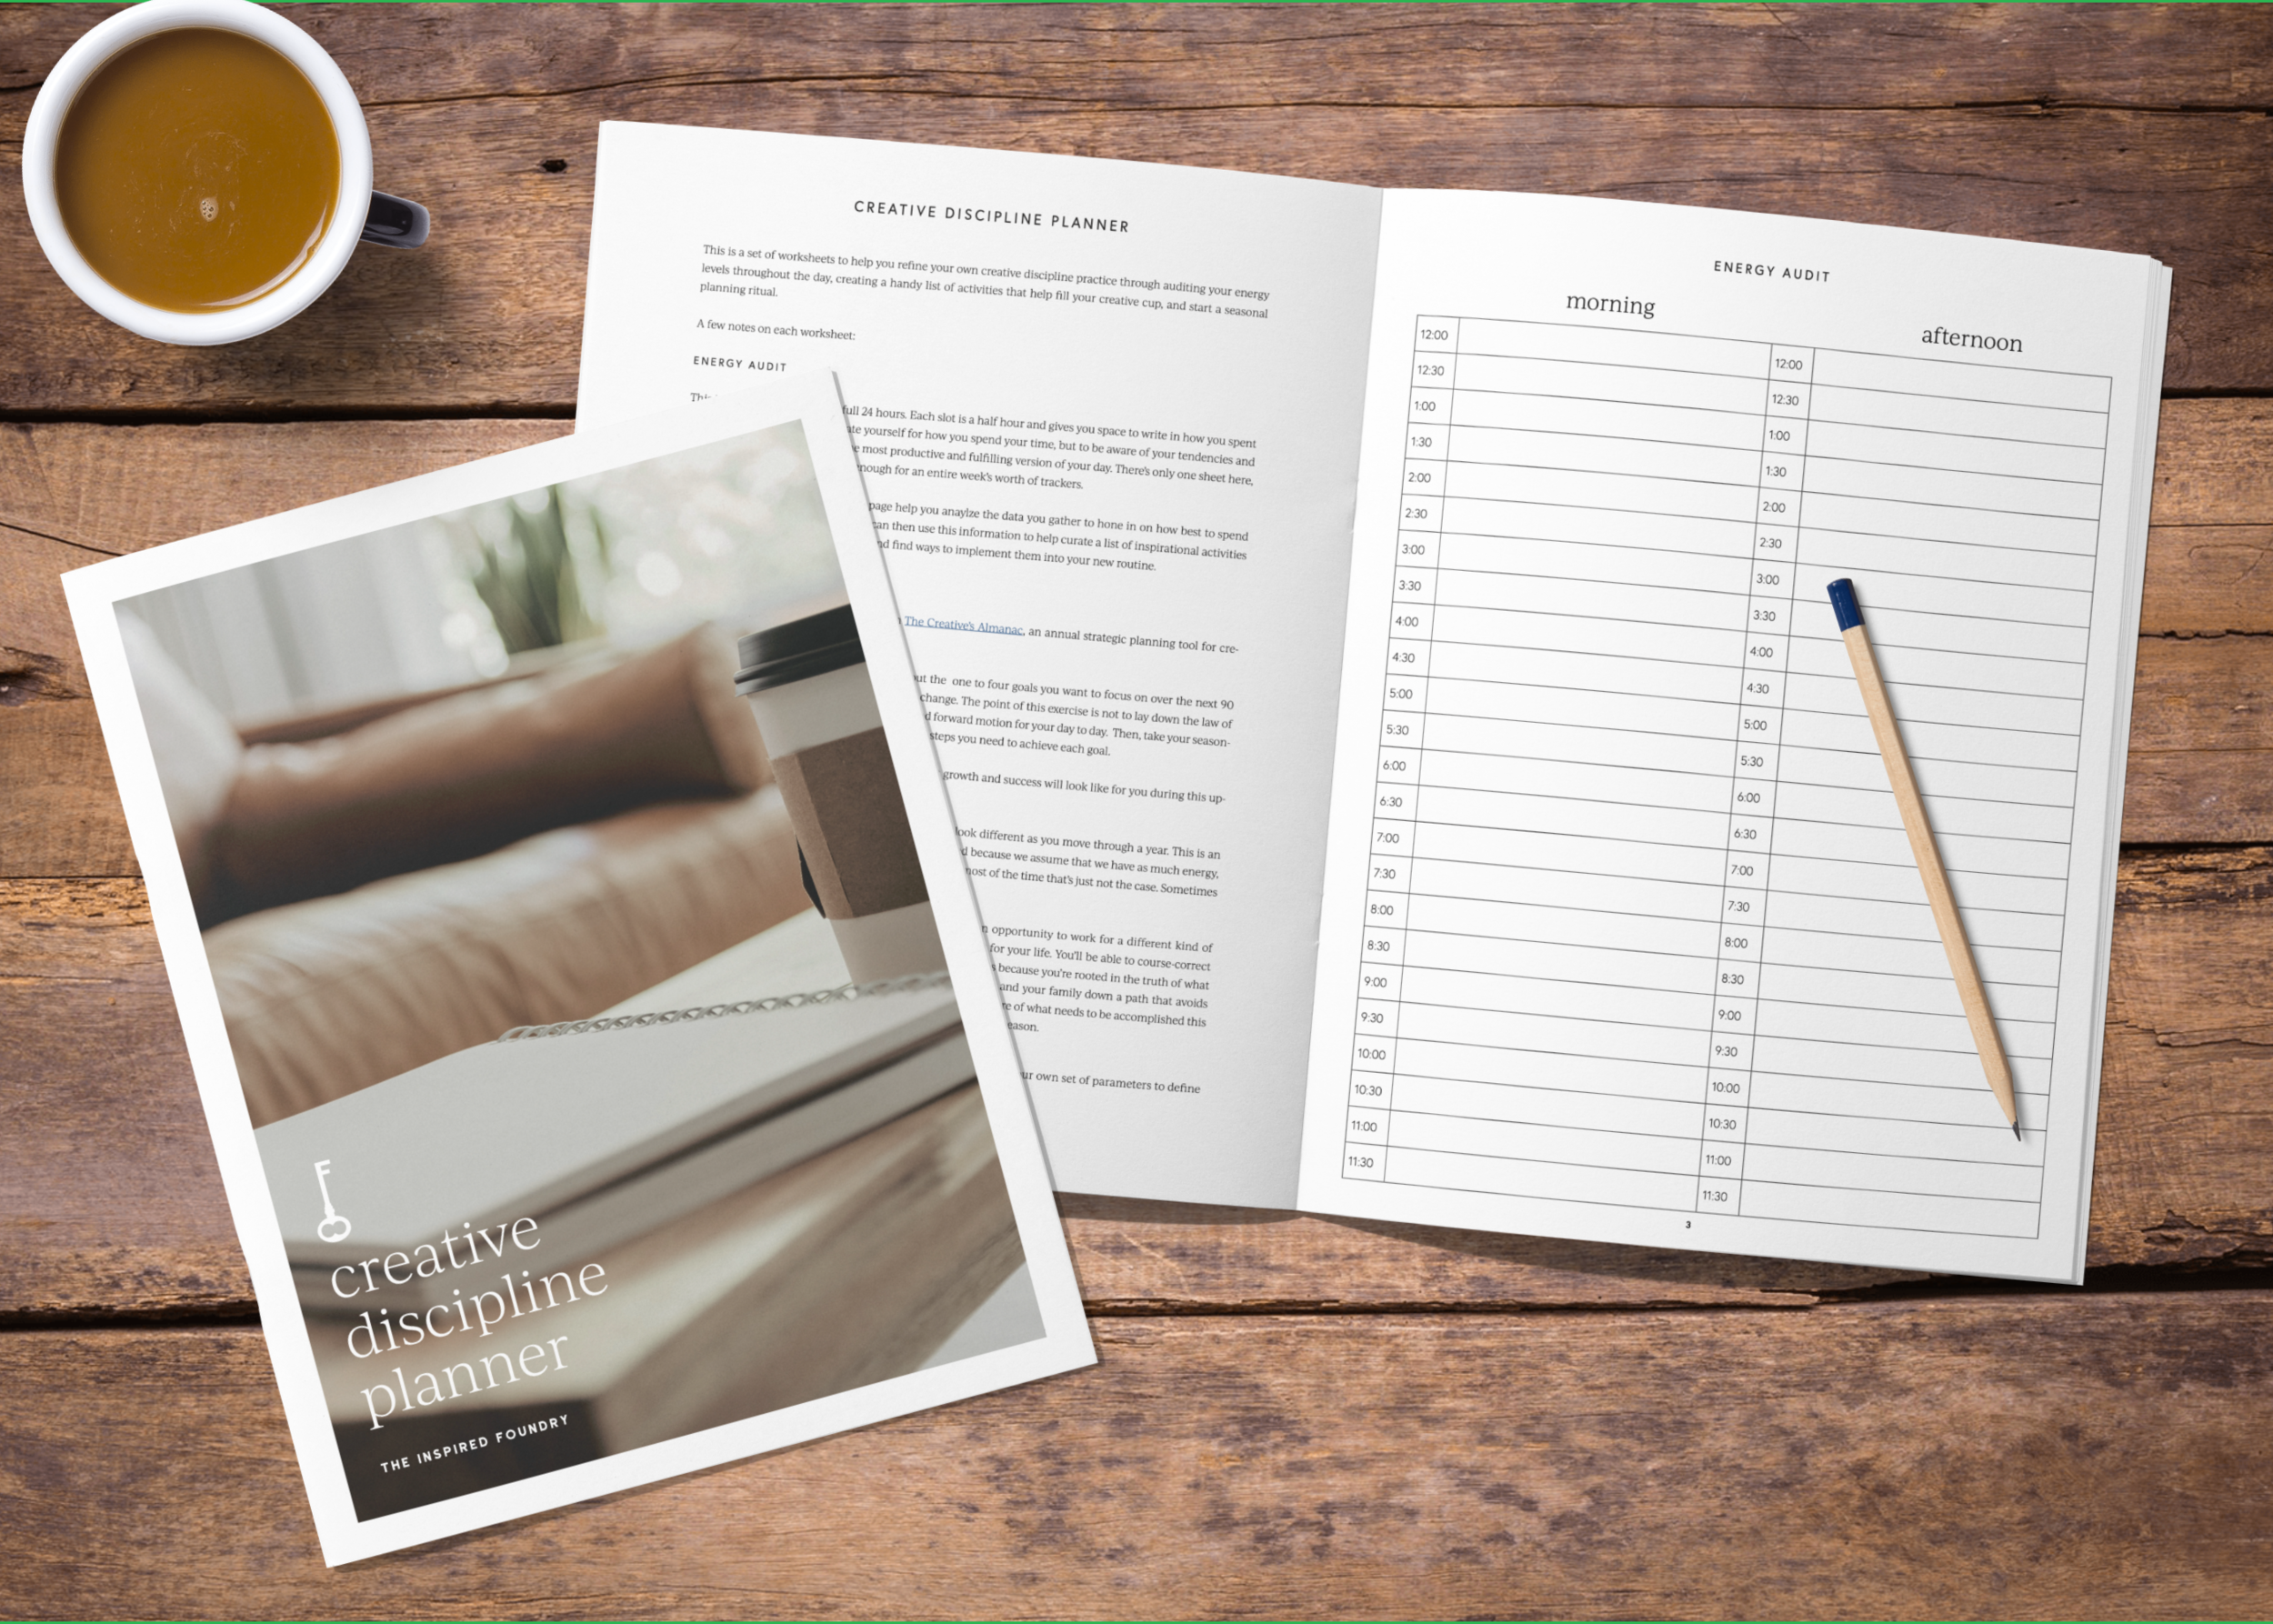 Creative Discipline Planner - A set of worksheets designed to help you create an intentional and intuitive routine around creative discipline. Head to the library to download the PDF! 